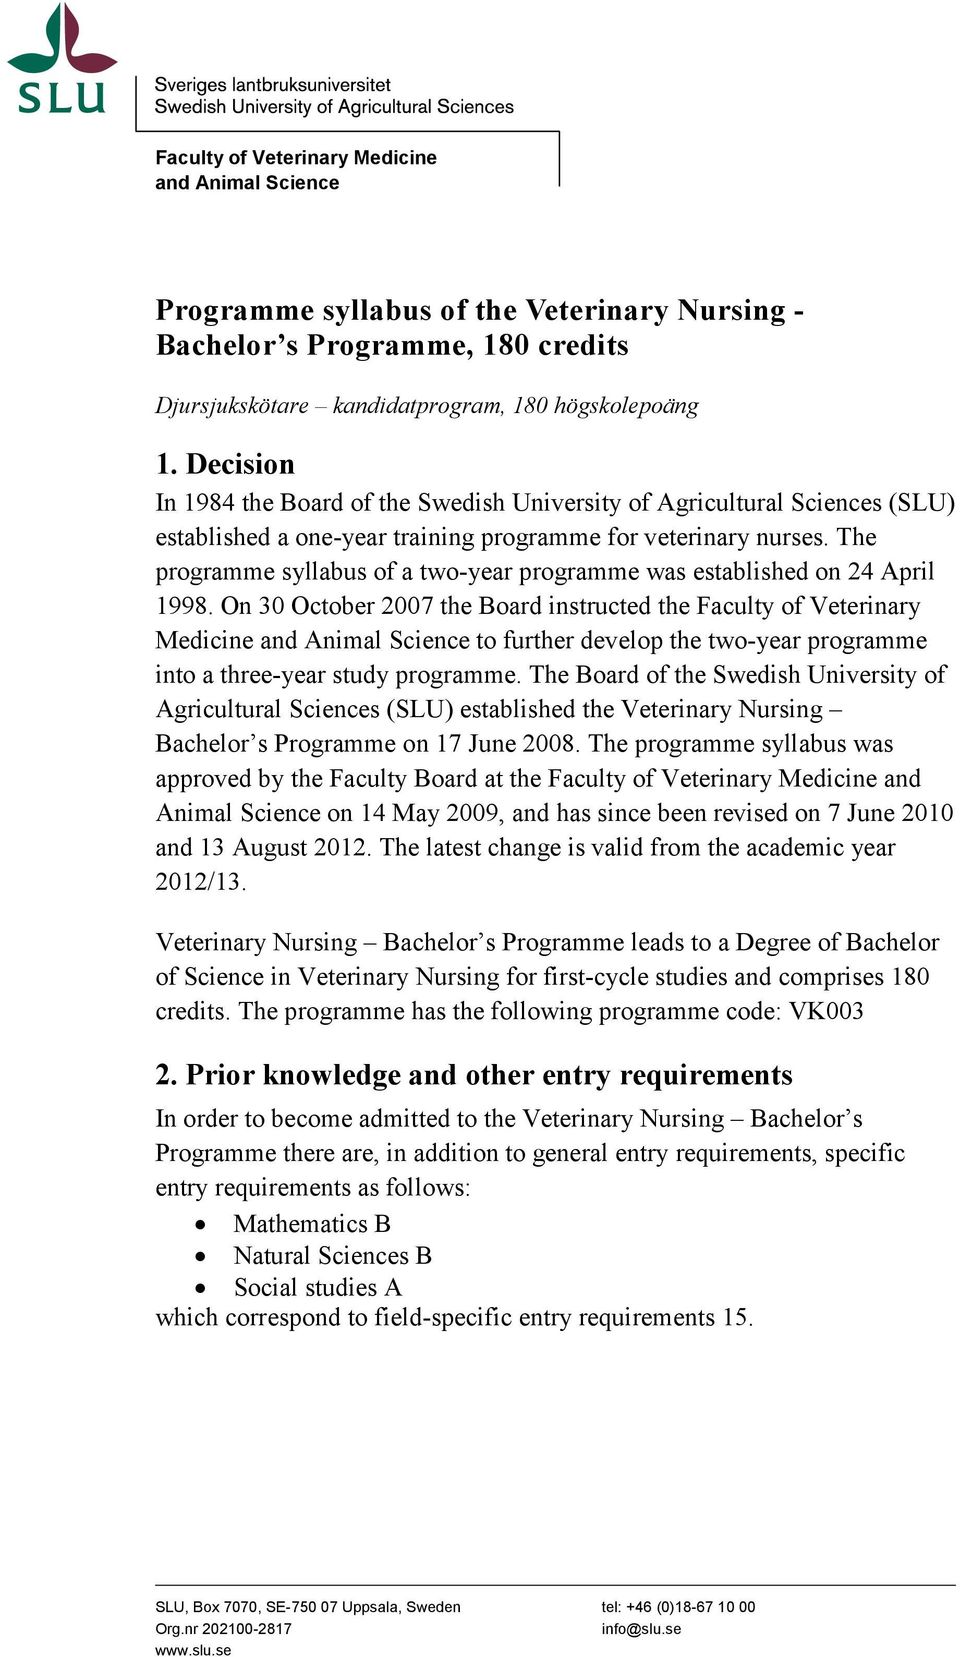 The programme syllabus of a two-year programme was established on 24 April 1998.